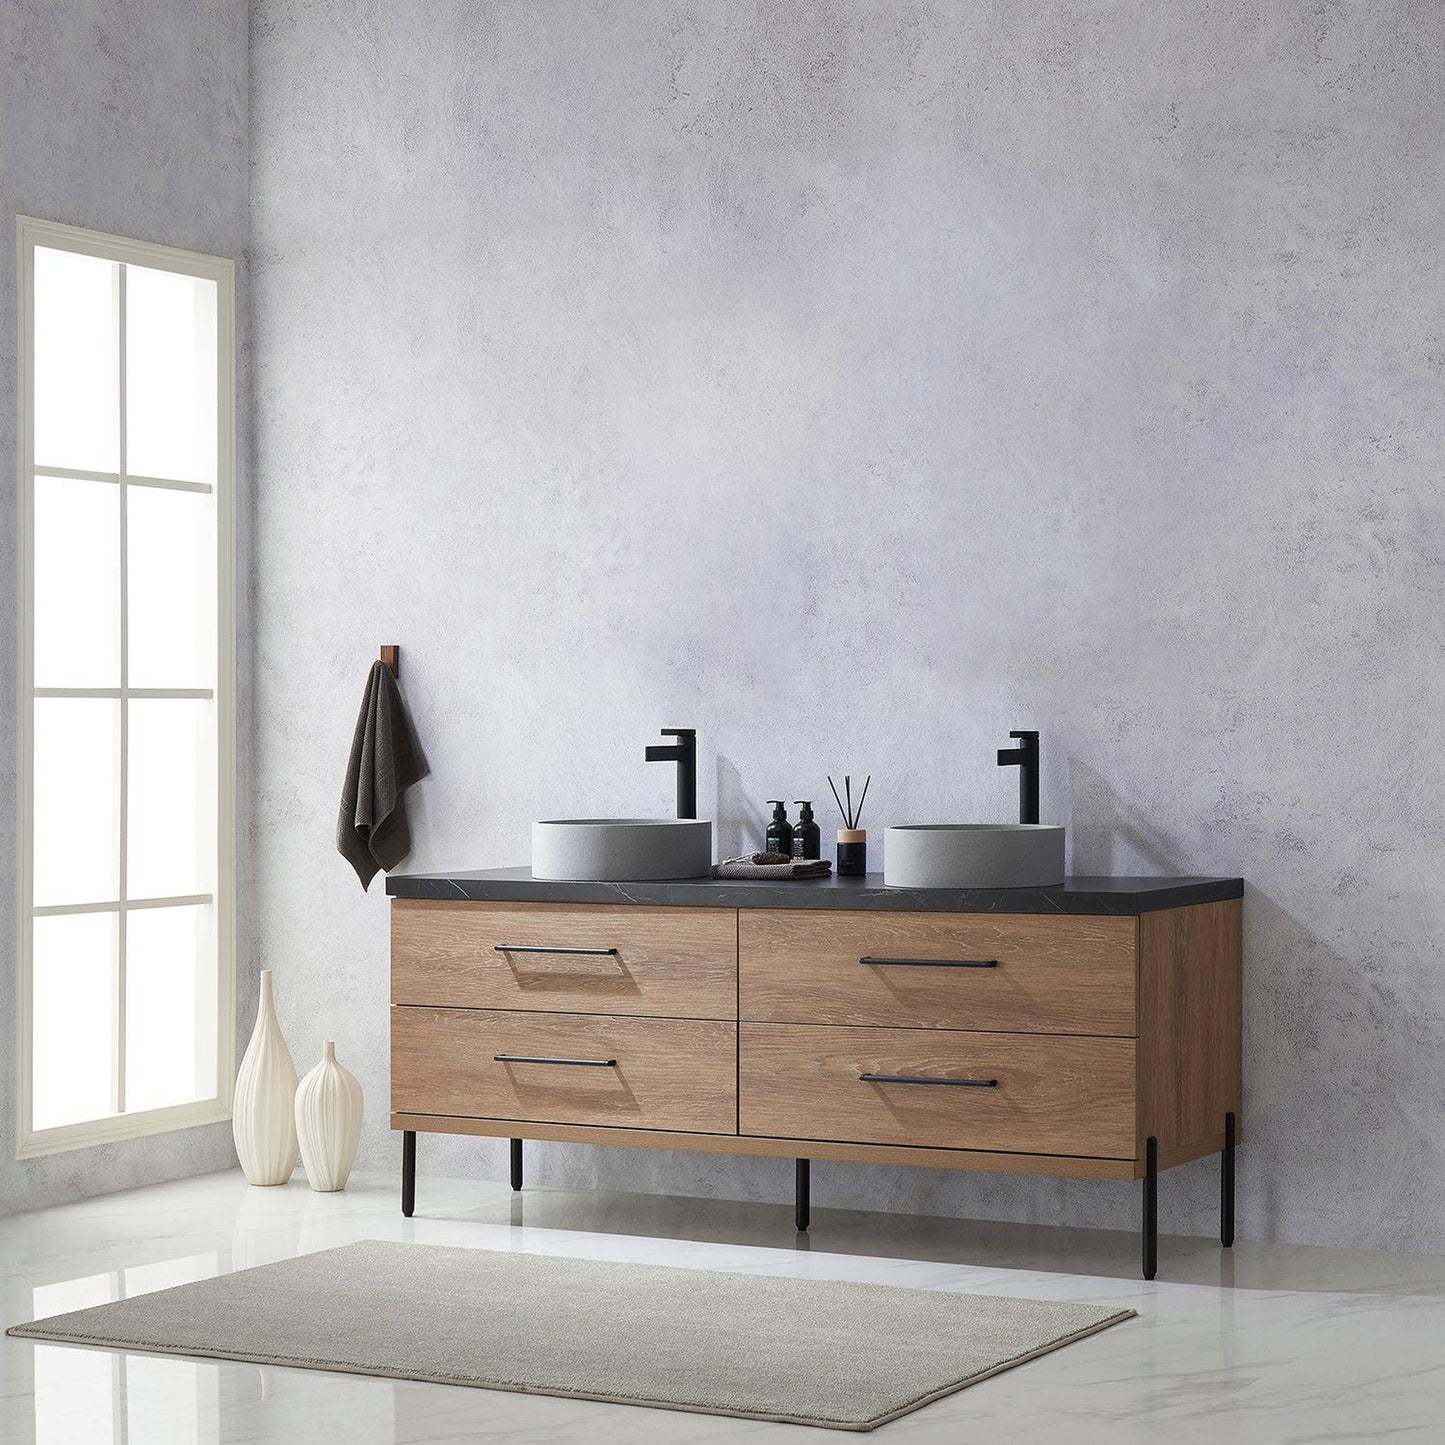 Vinnova Trento 72" Double Sink Bath Vanity In North American Oak With Black Sintered Stone Top With Circular Concrete Sink